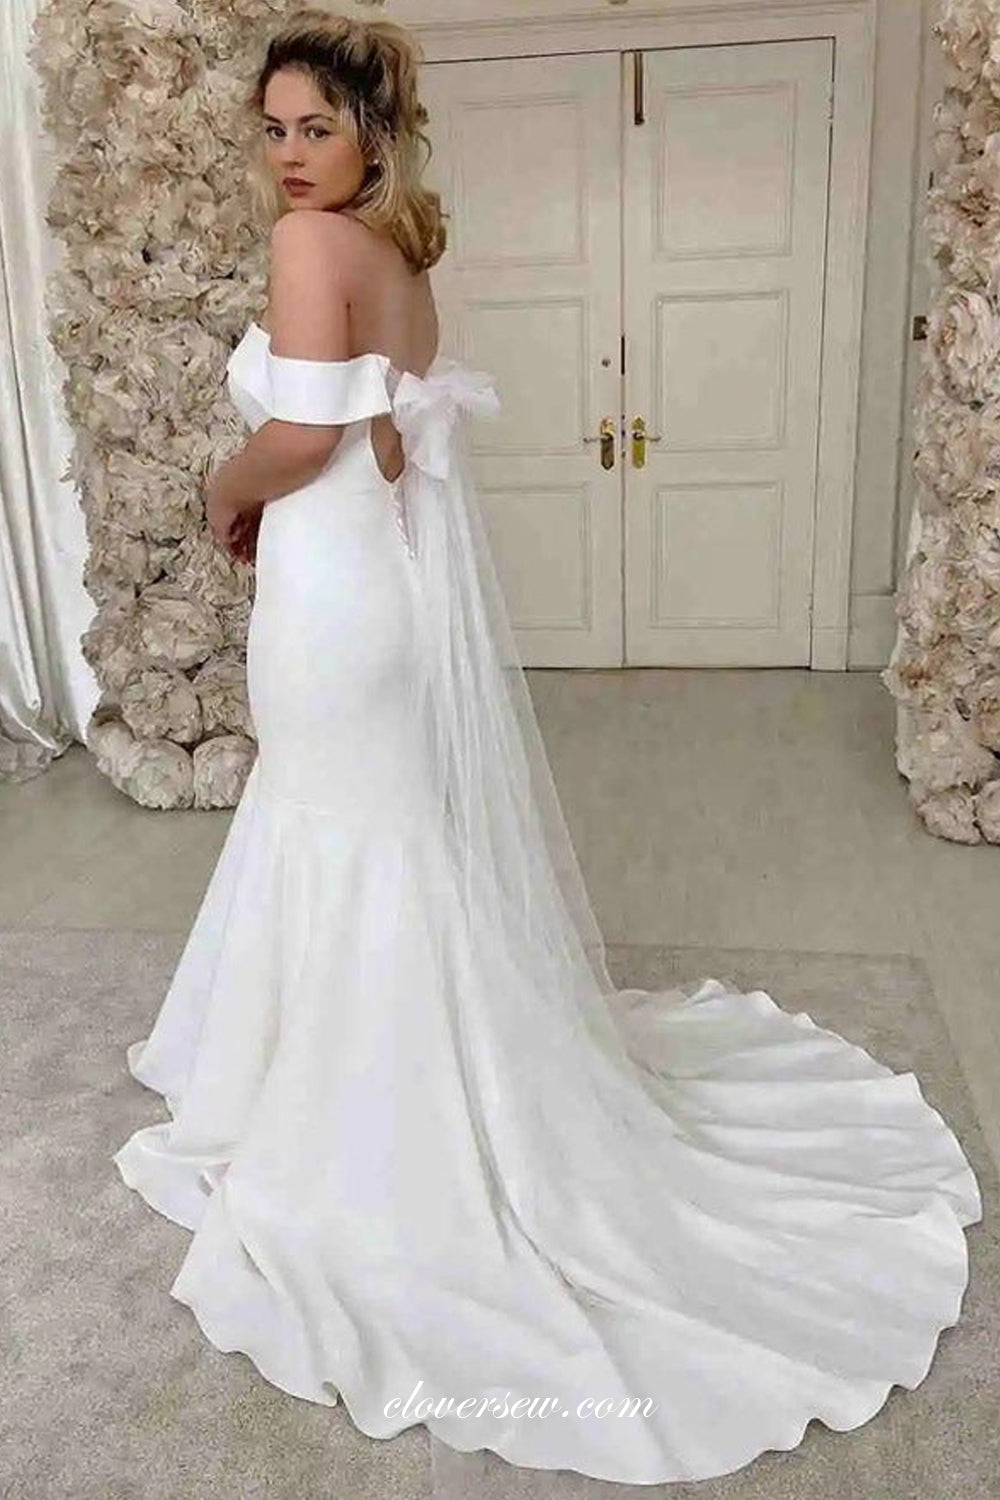 Off White Satin Simple Off The Shoulder Mermaid With Bowknot Train Wedding Dresses, CW0335